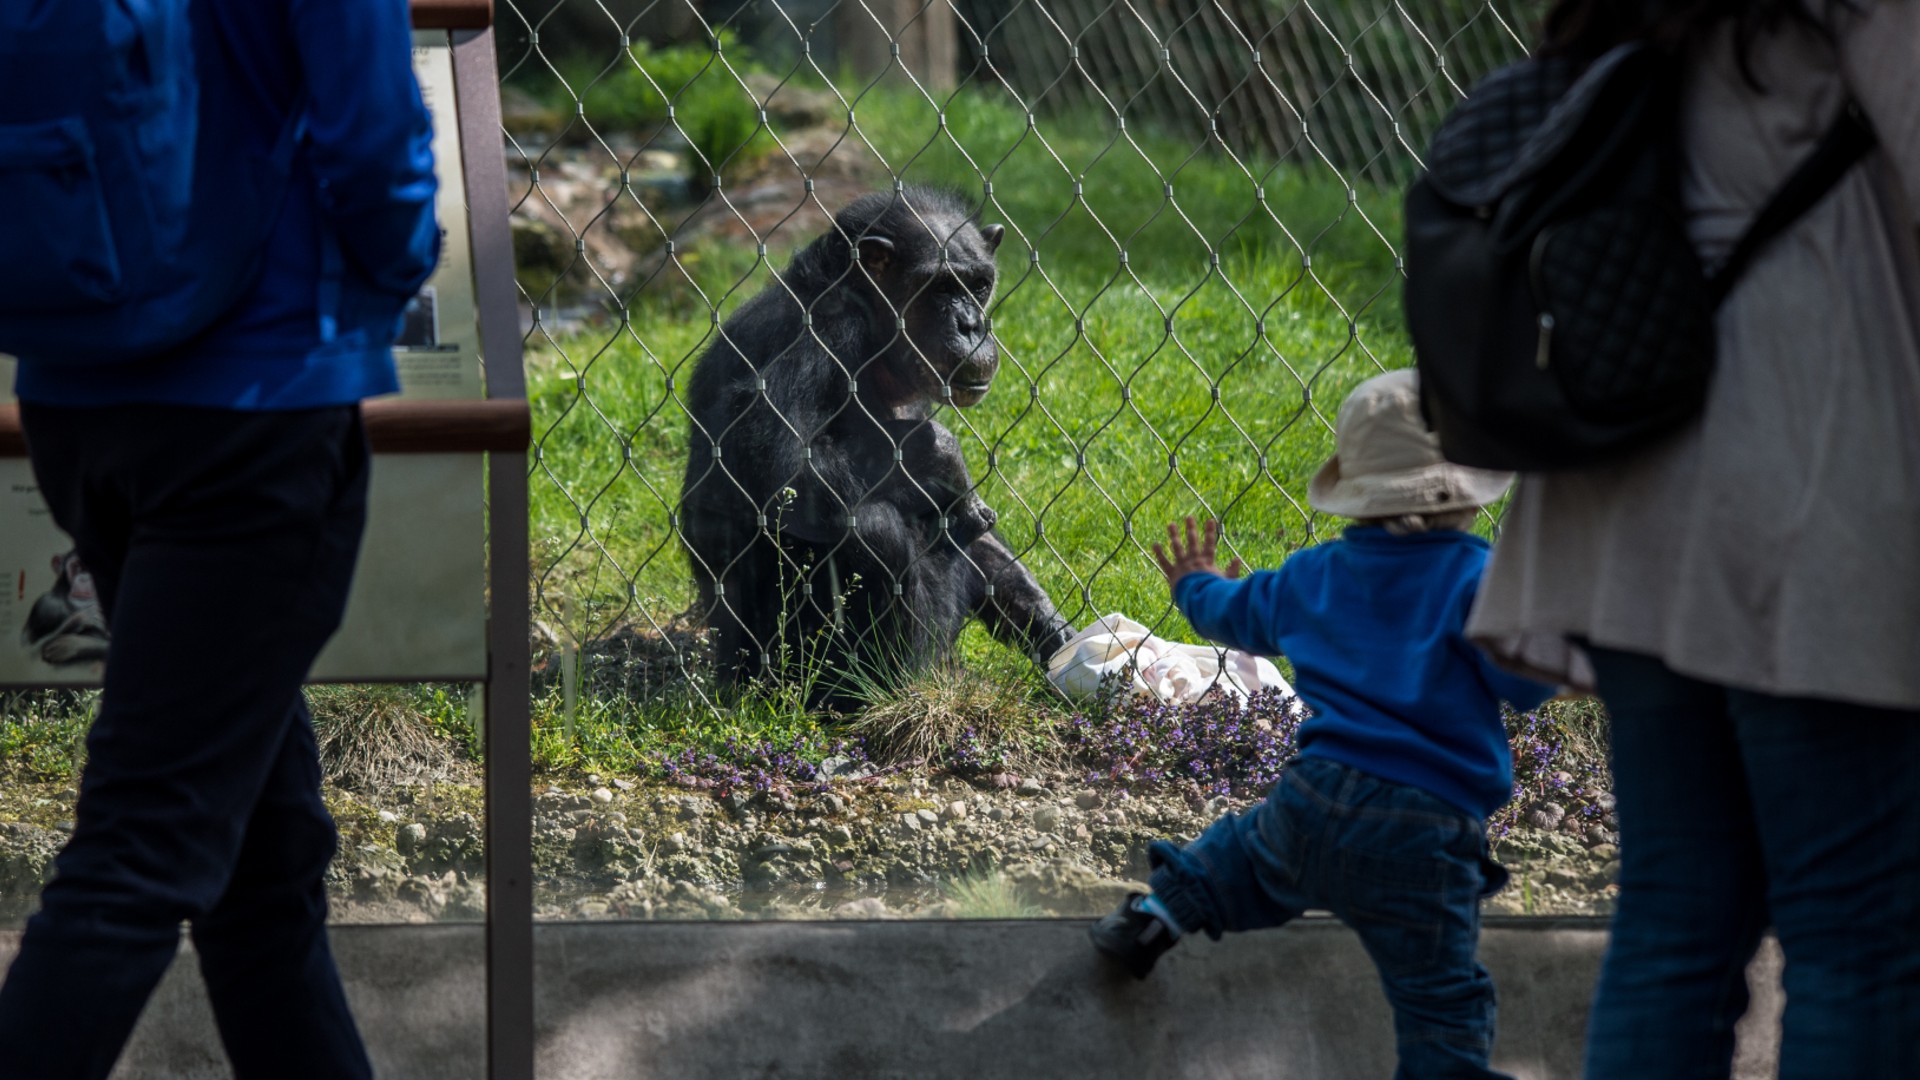 Two adults and a little boy looking at a chimpanzee through a mesh fence, in a zoo enclosure